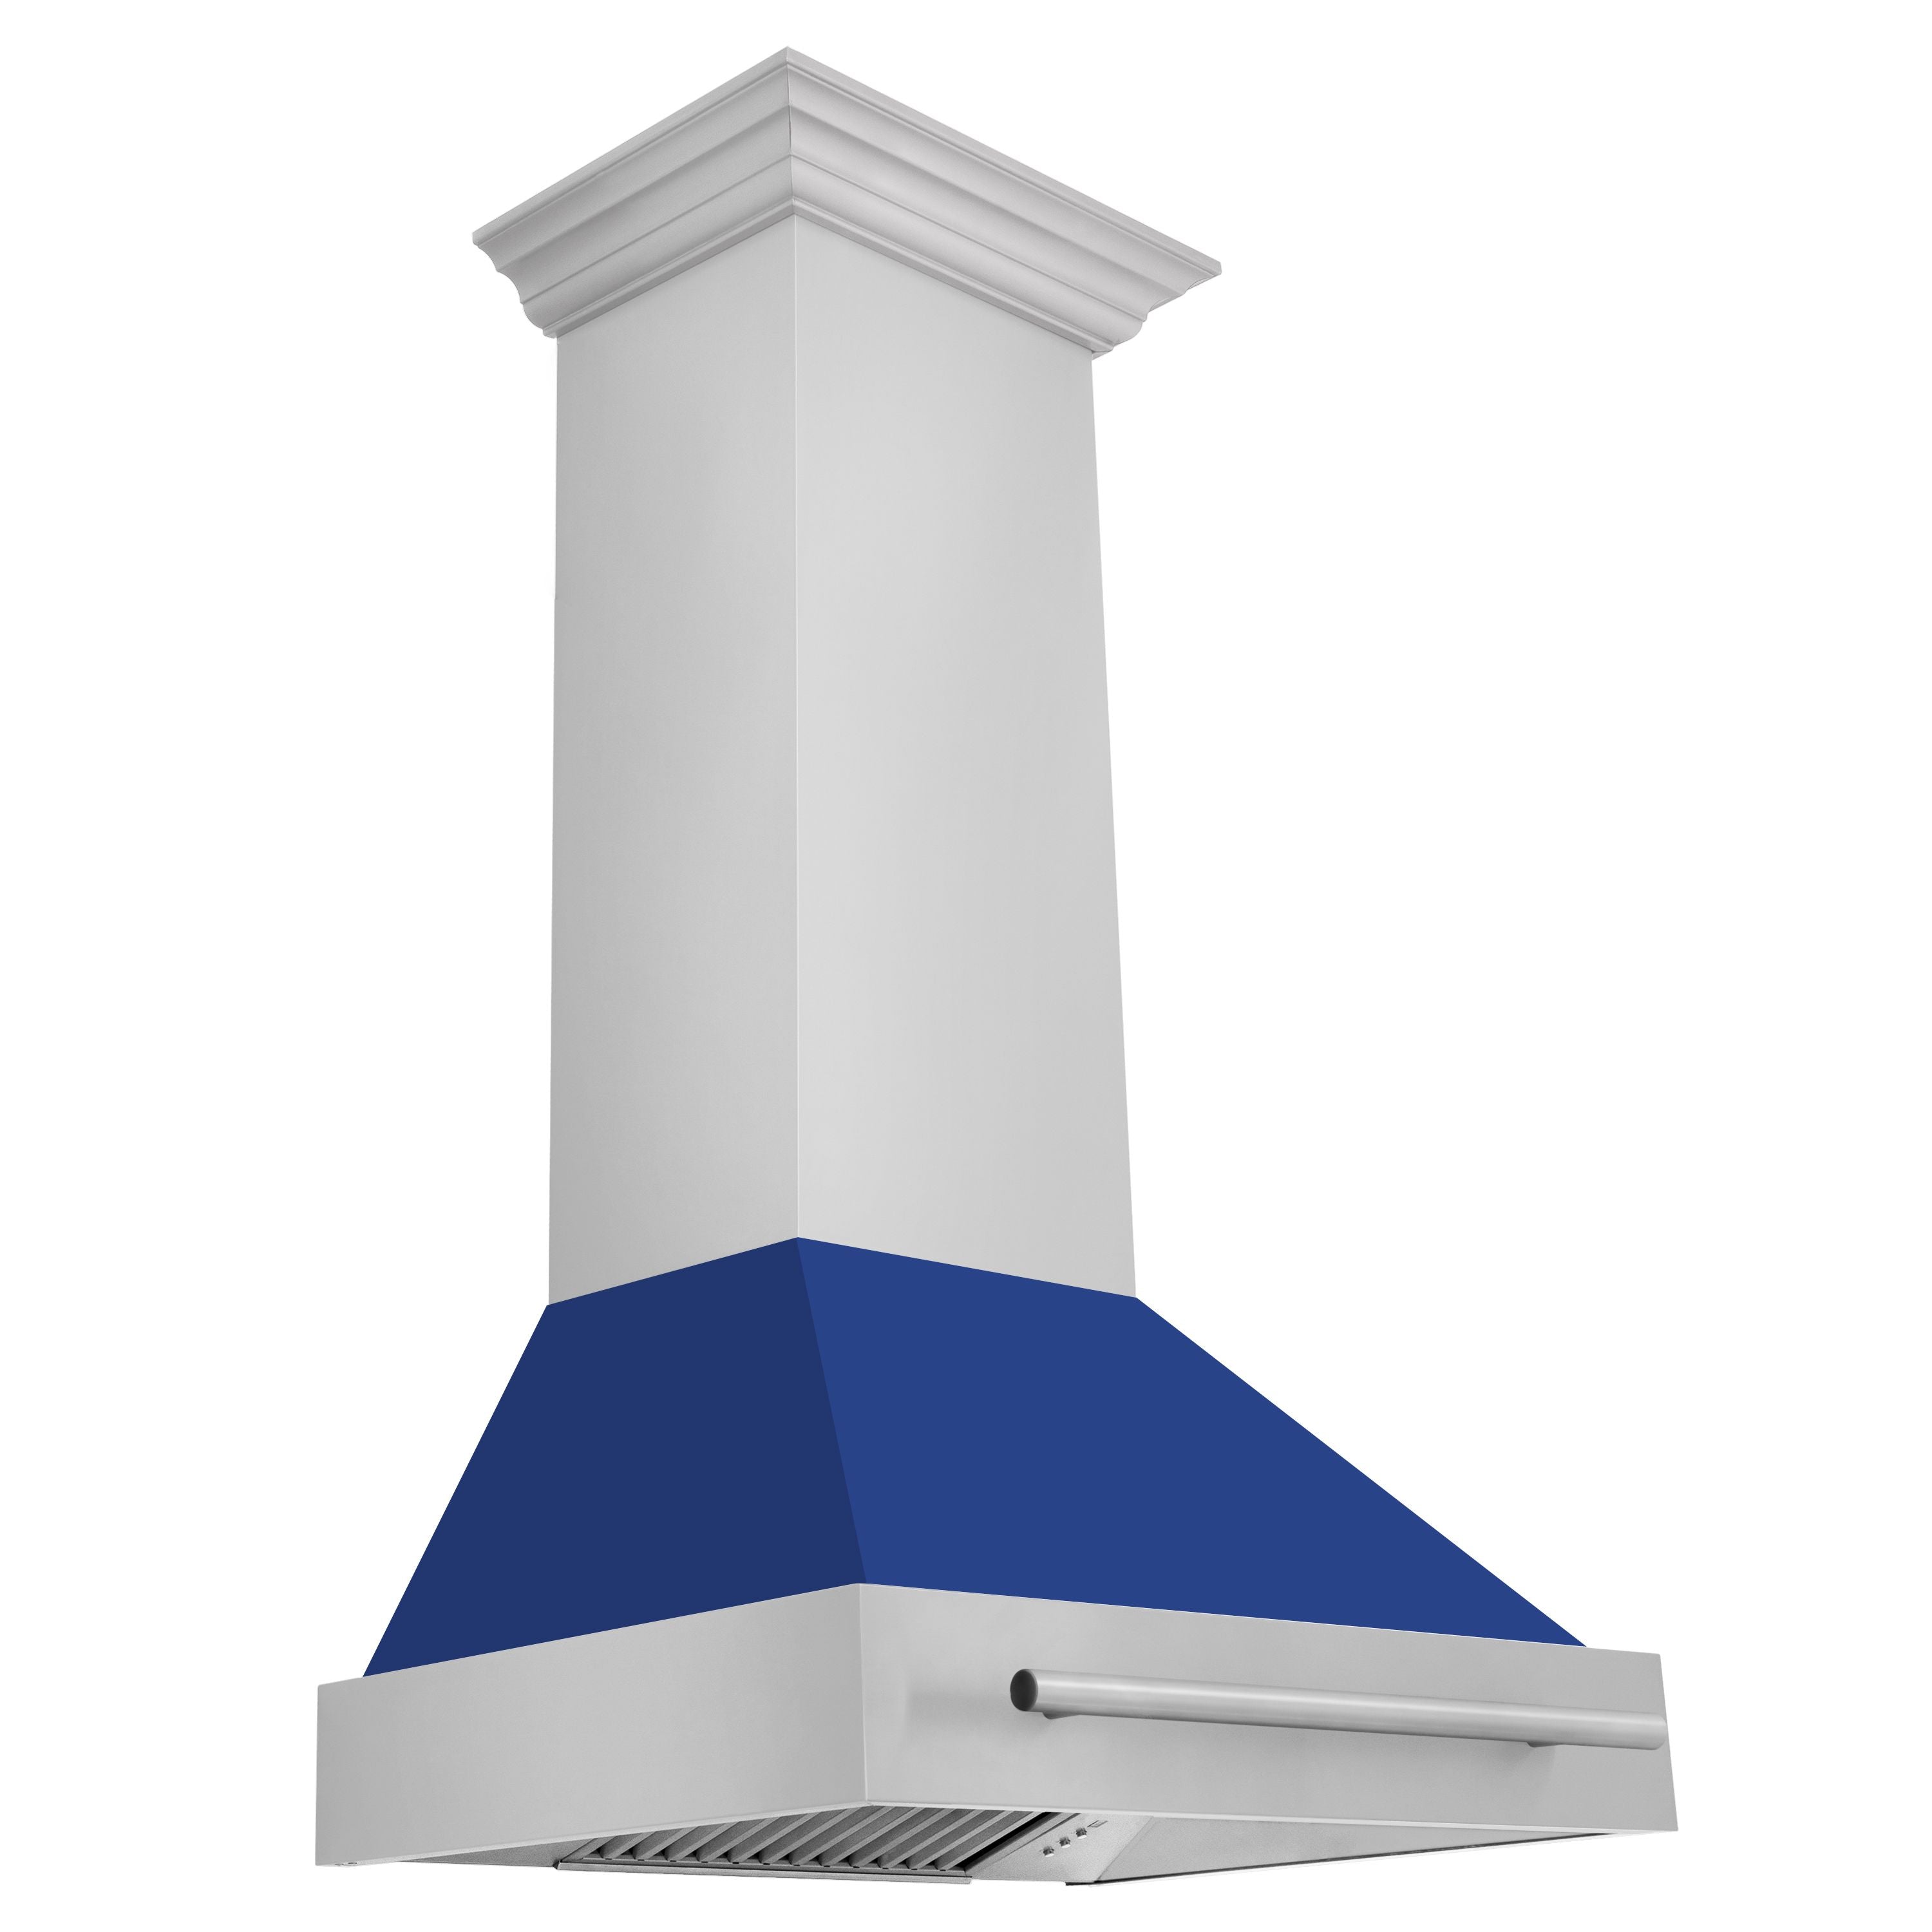 ZLINE 30 Inch Stainless Steel Range Hood with Blue Matte Shell and Stainless Steel Handle, 8654STX-BM-30